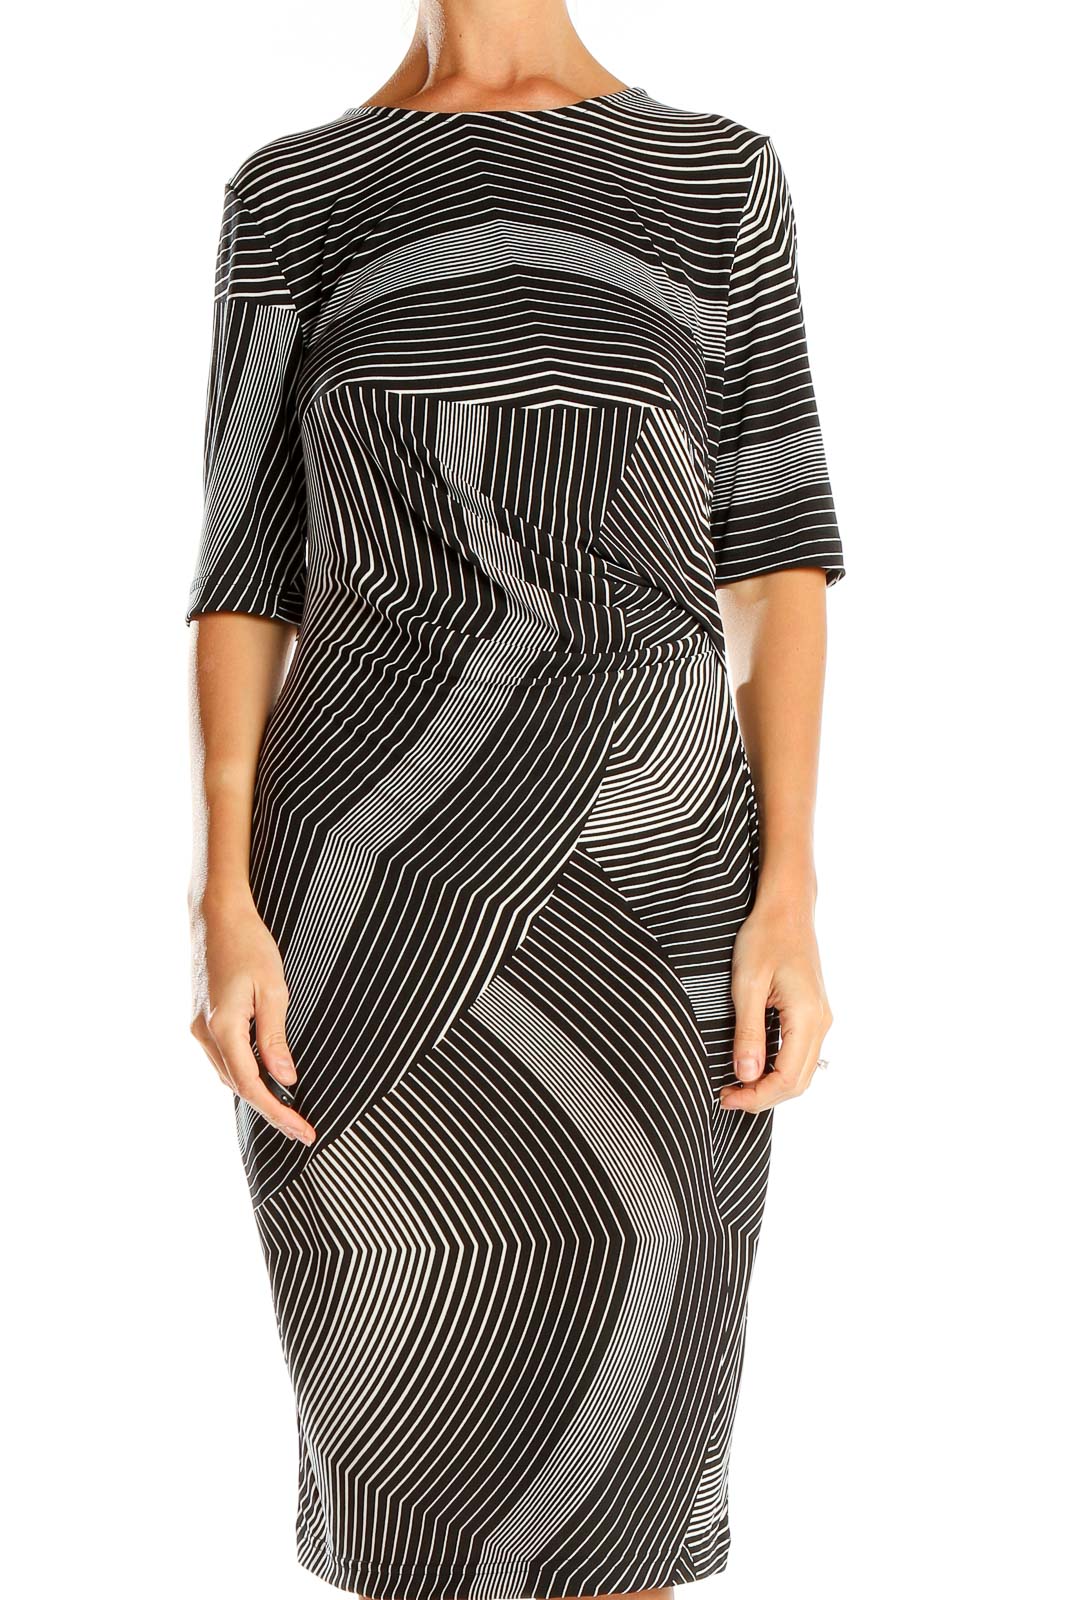 Gray Abstract Striped Sheath Dress Front